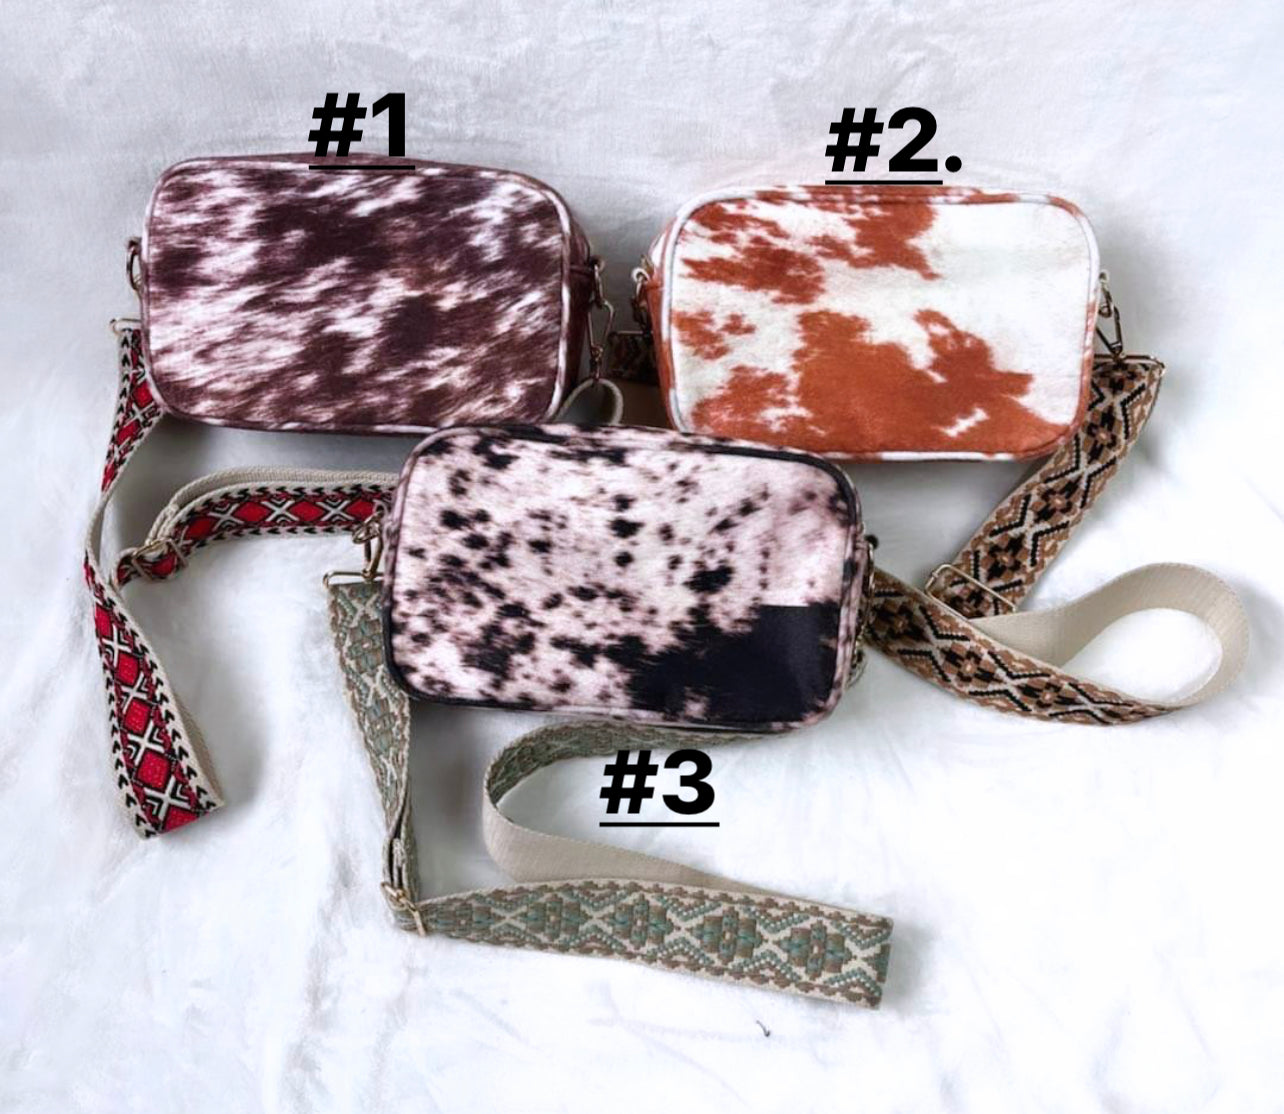 New cowhide sling bags (preorder will arrive mid October)